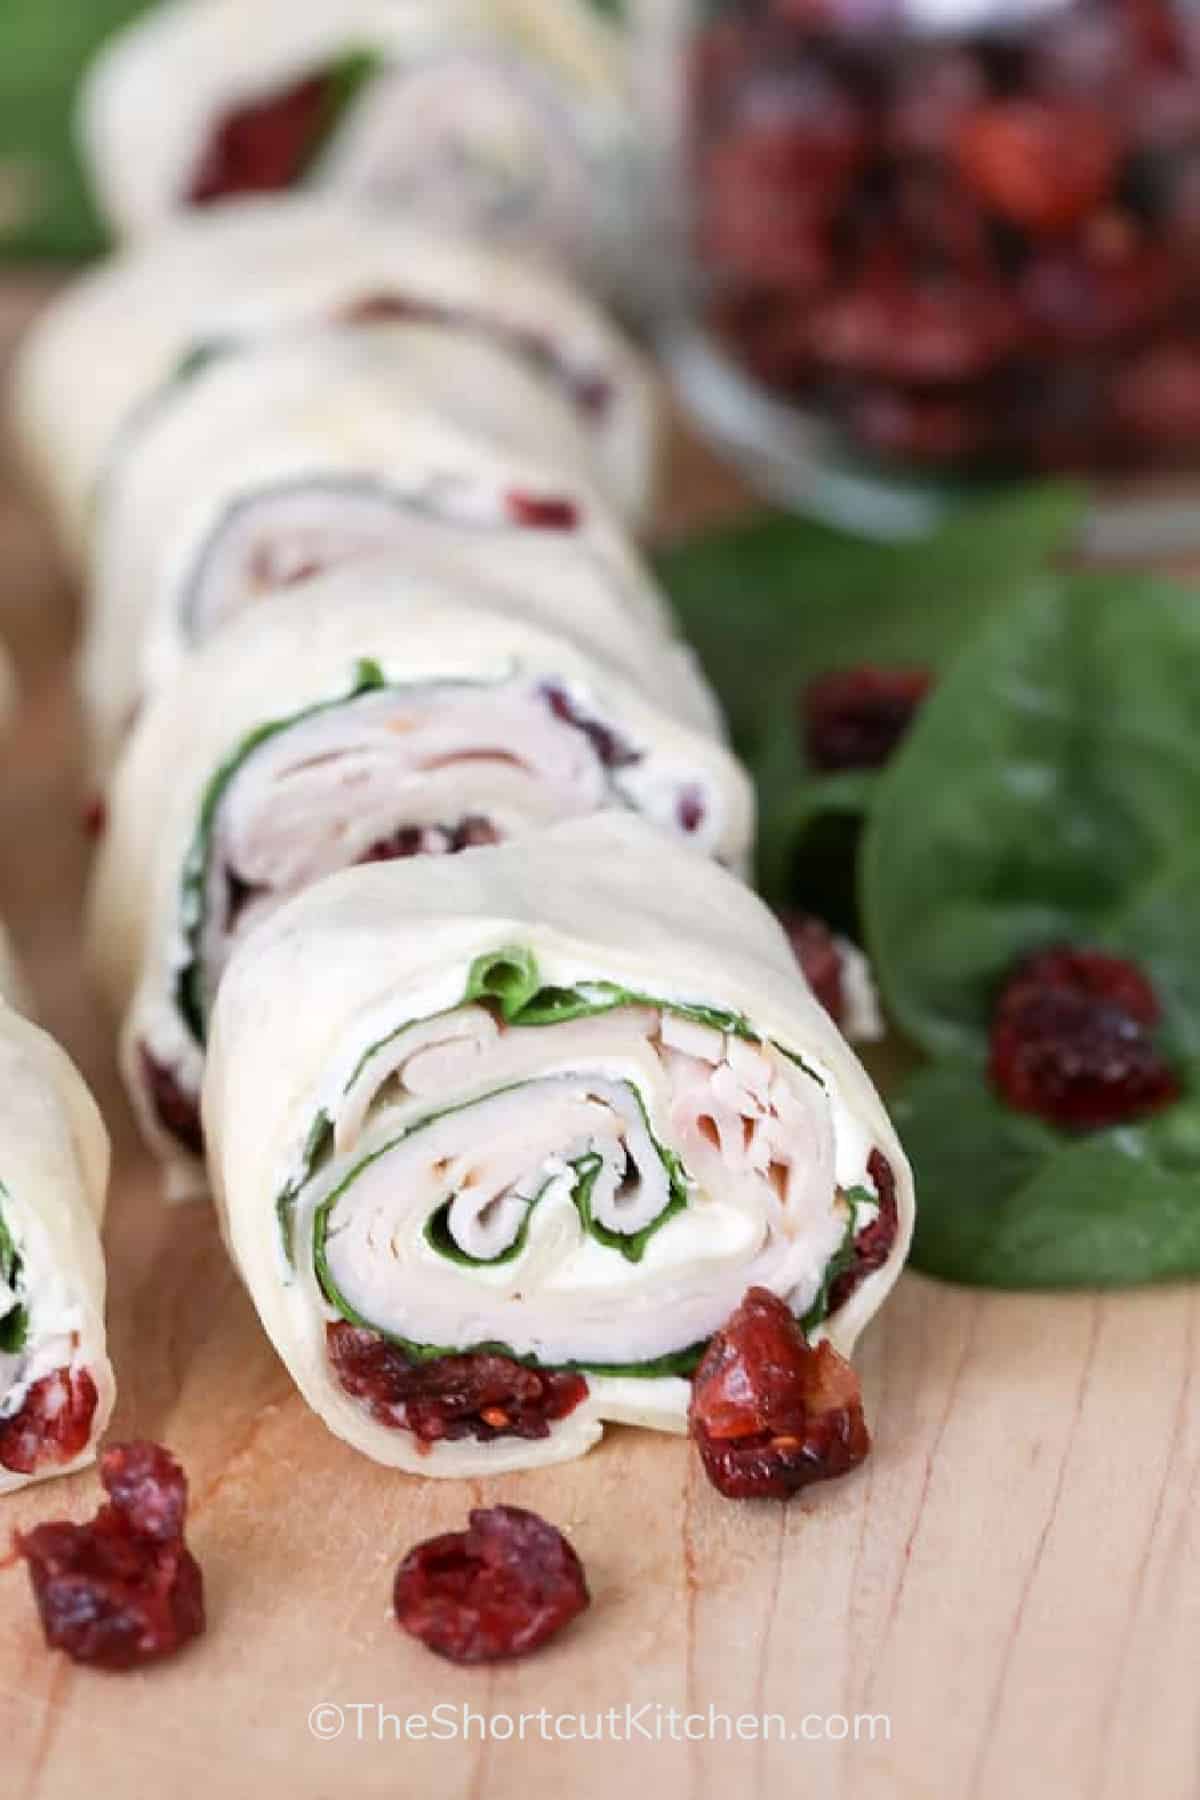 cranberry turkey pinwheels on a wooden board with cranberries and spinach leaves on the side